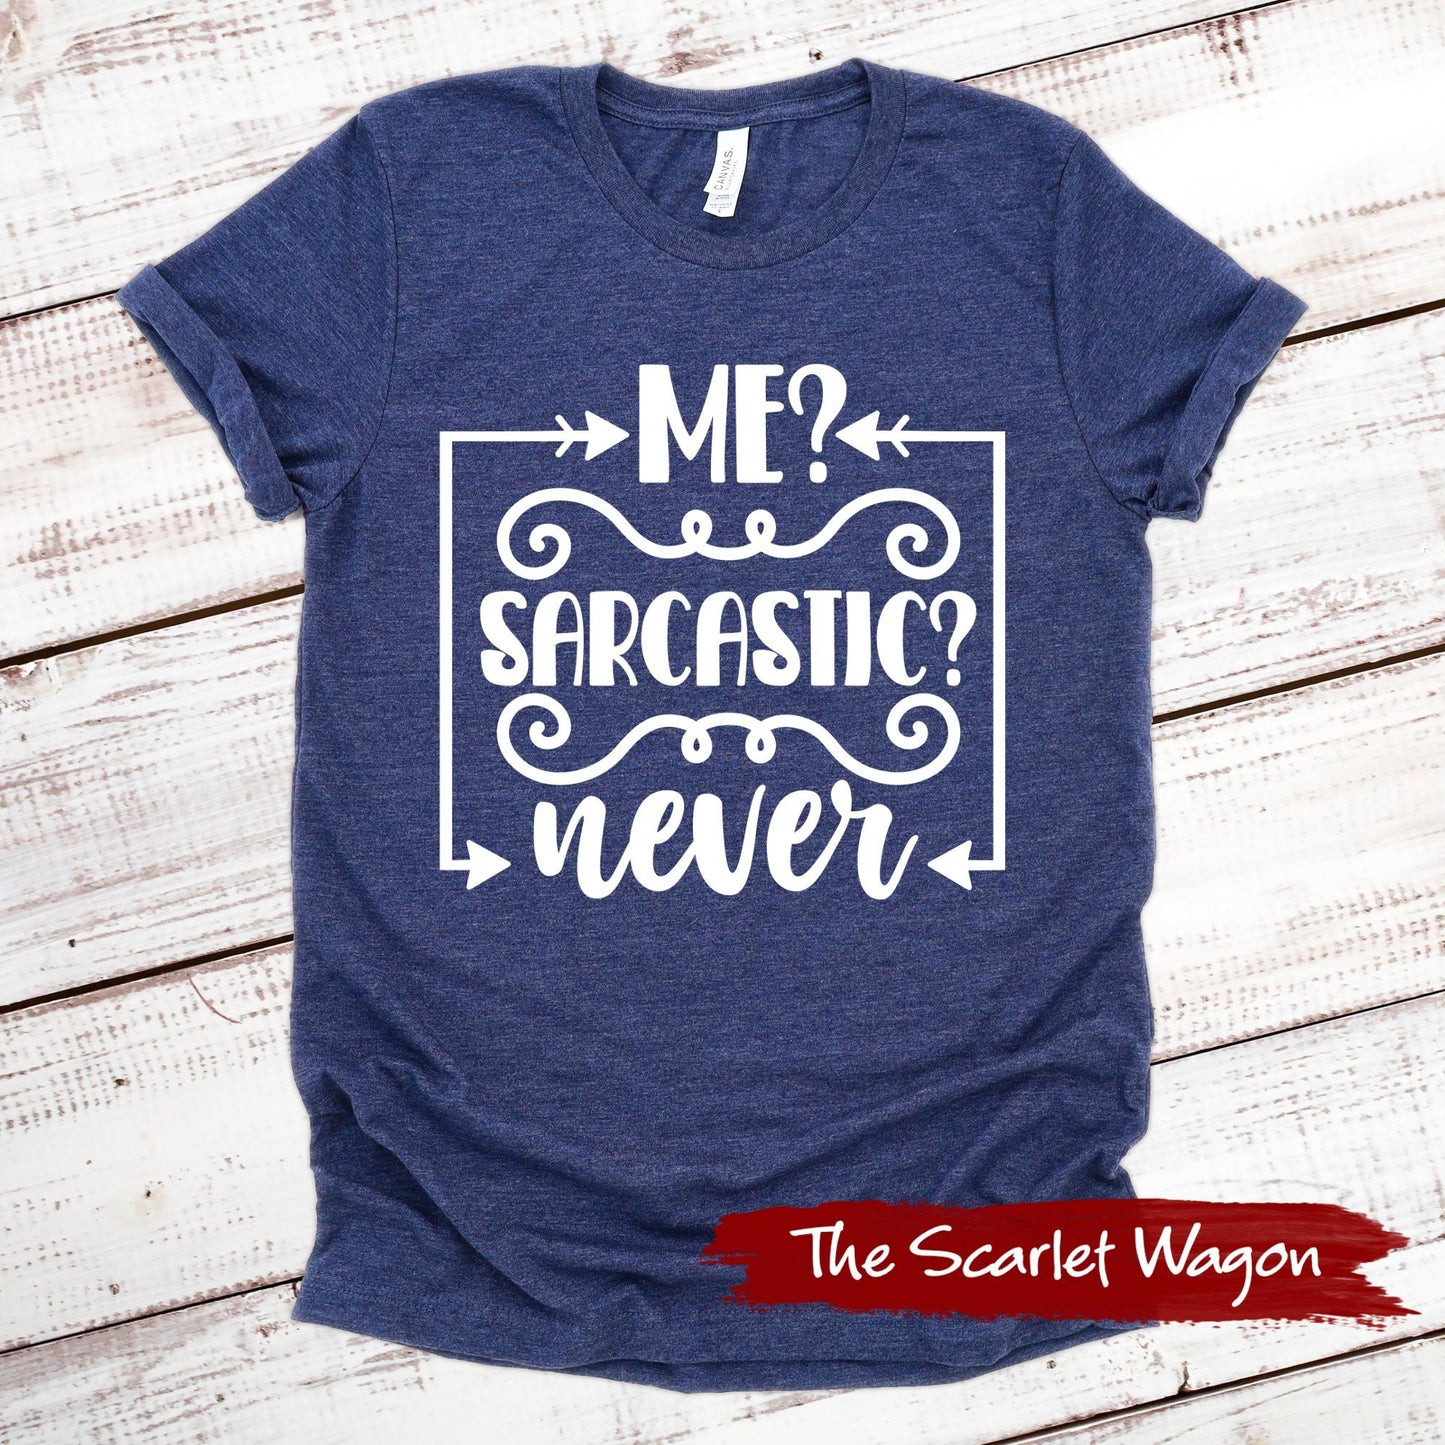 Me? Sarcastic? Never Funny Shirt Scarlet Wagon Heather Navy XS 